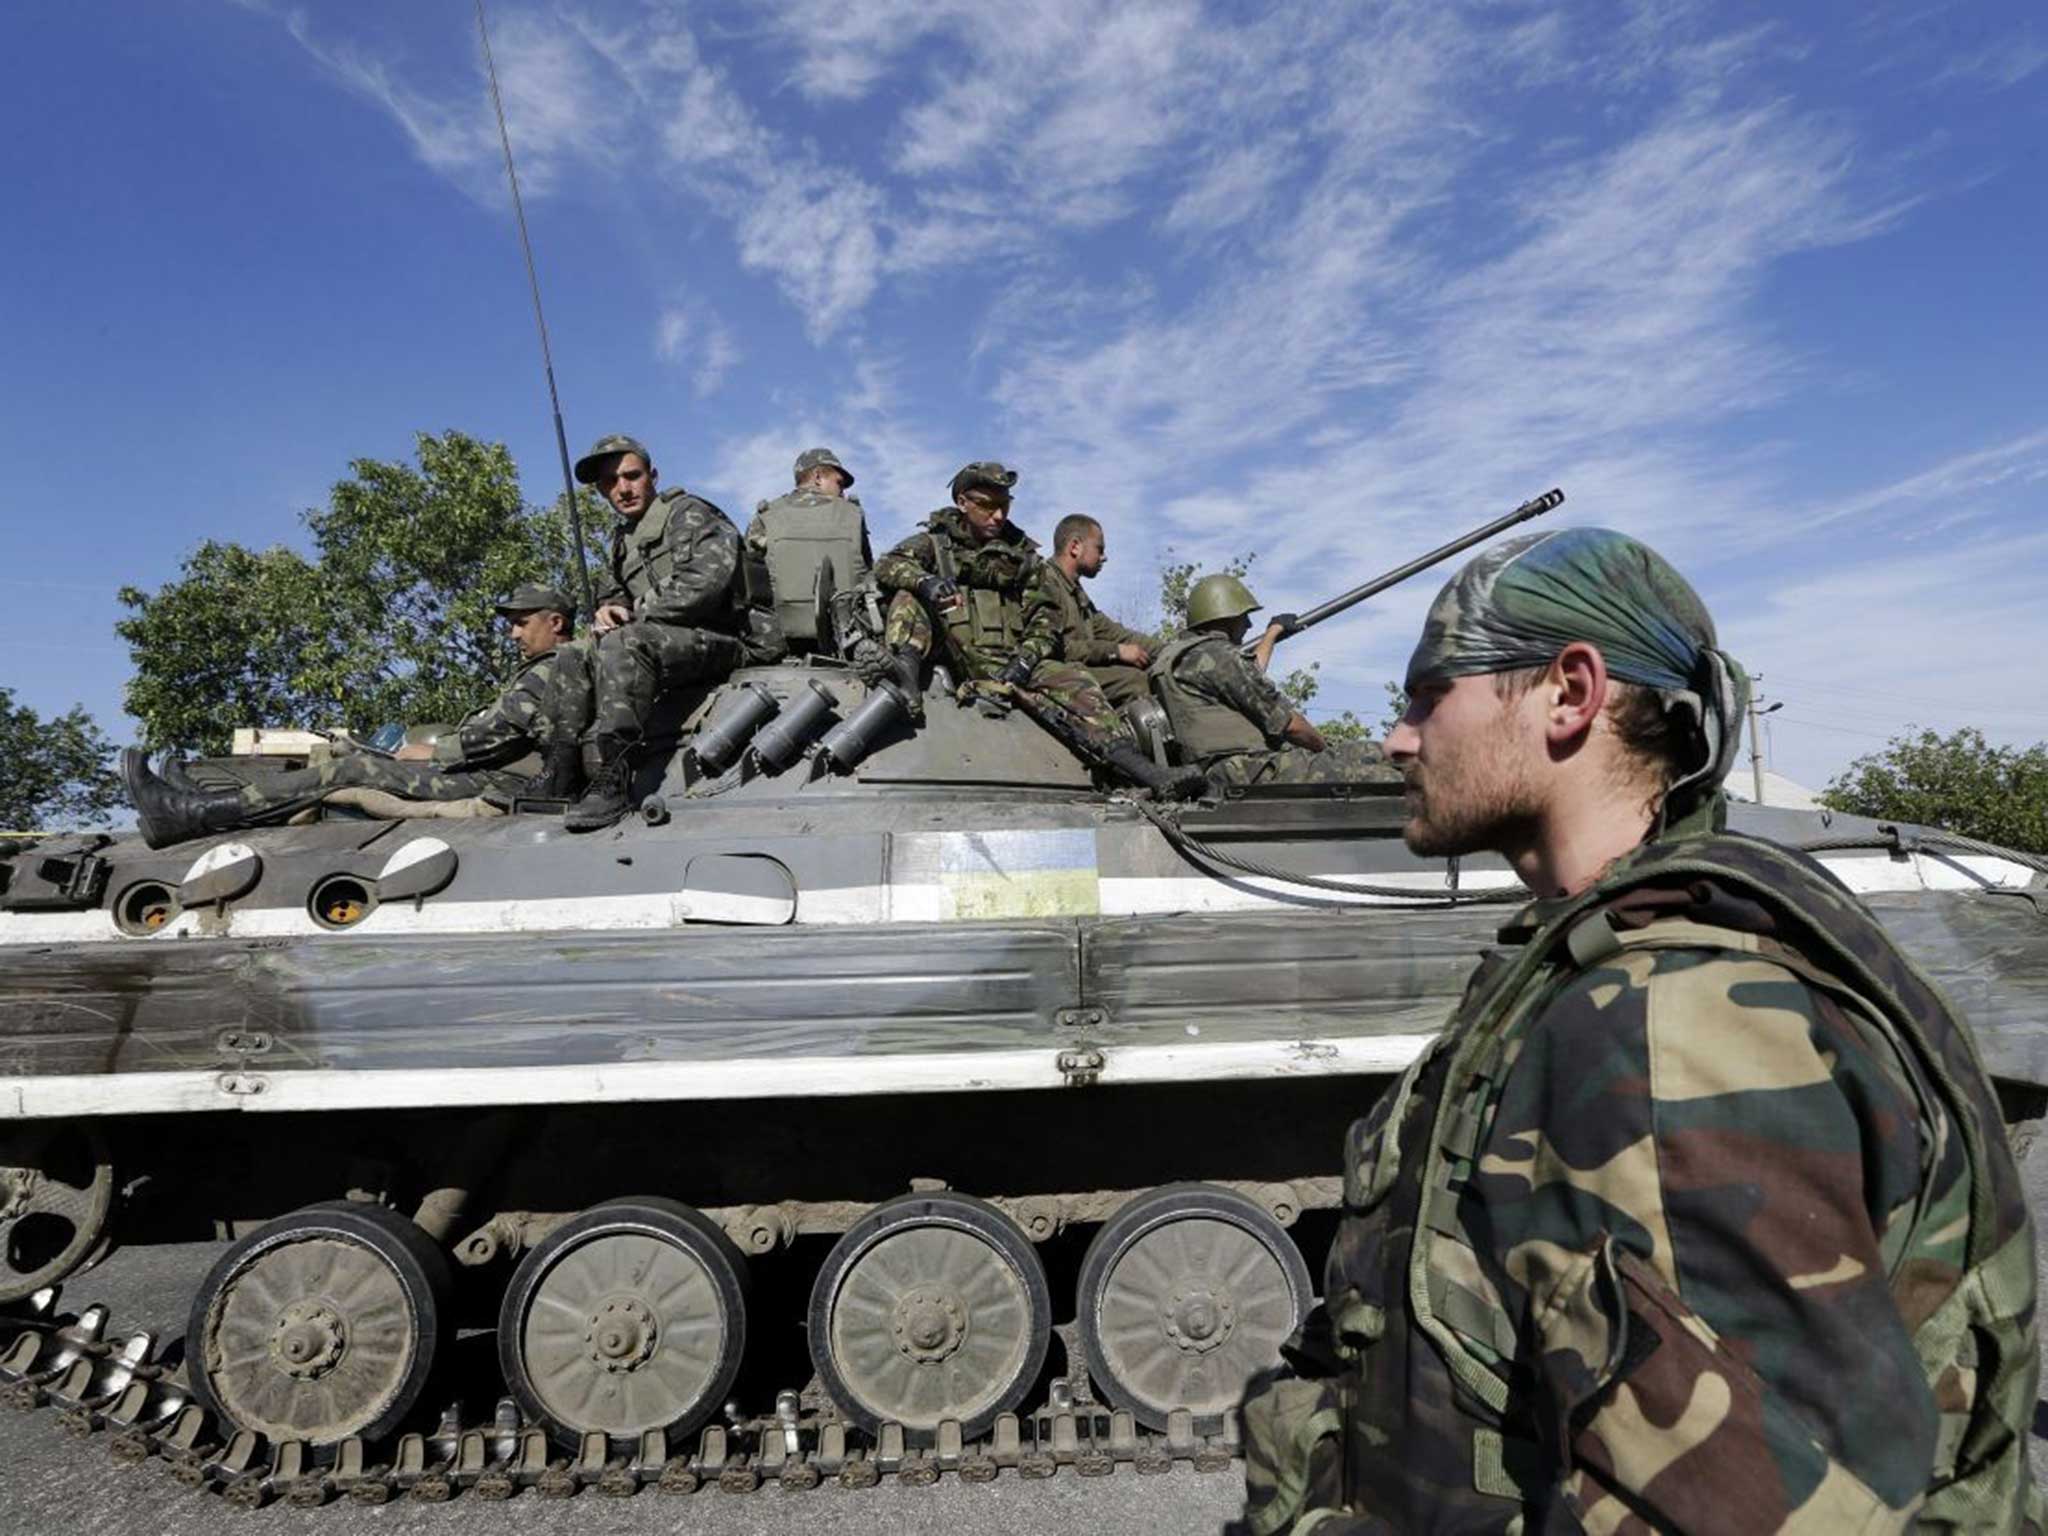 Ukrainian government troops have retreated from the area near Luhansk airport after overnight clashes